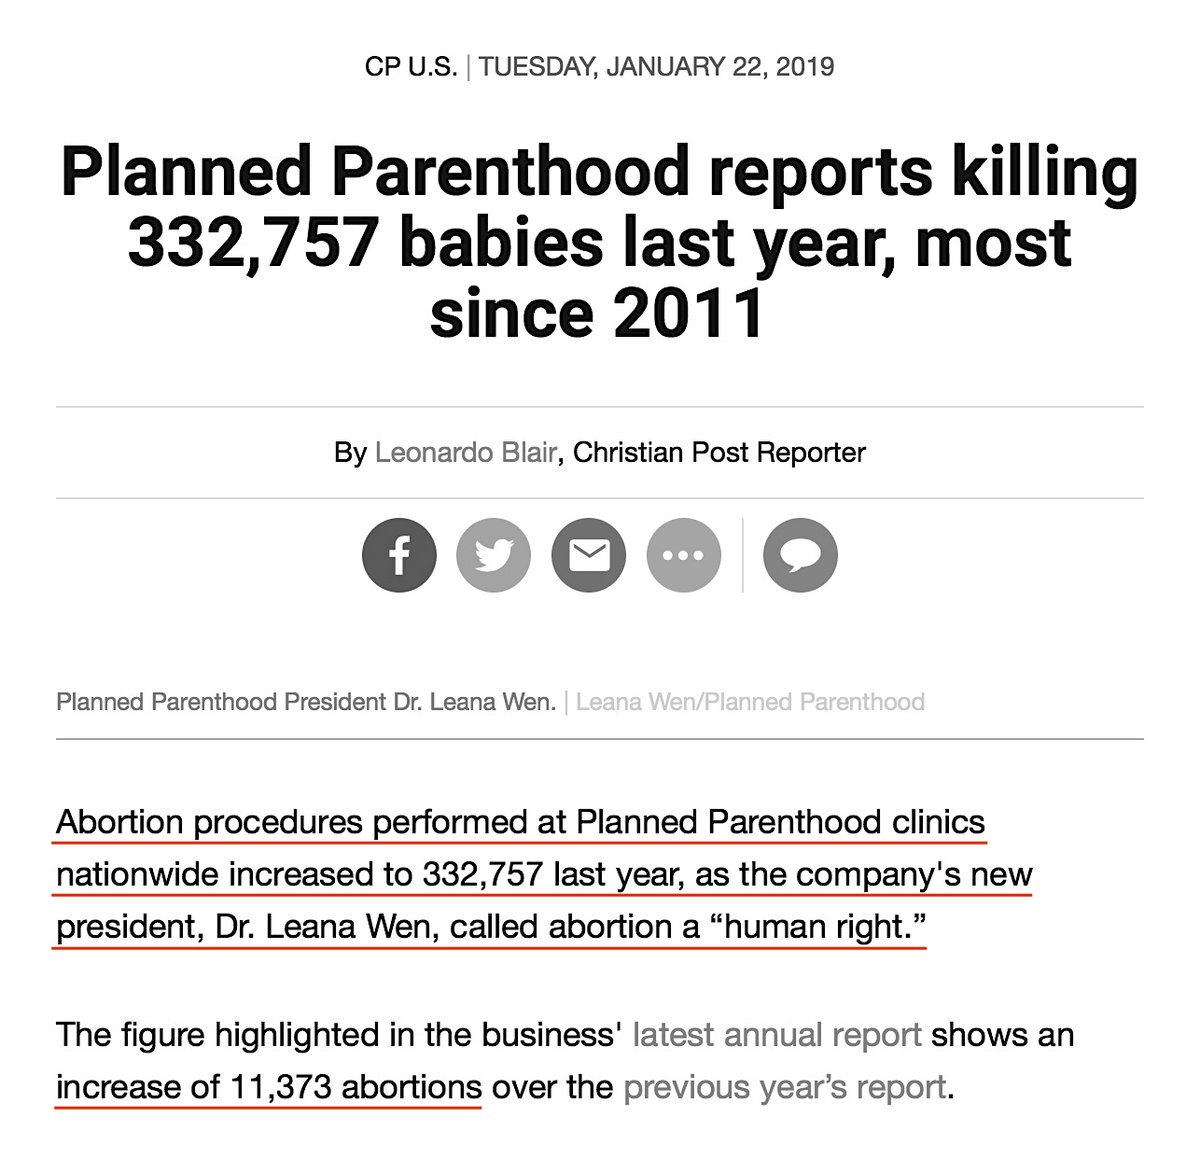 With 332,757 Abortions In 2018, Planned Parenthood Clinics Performed 118 Abortions For Every One Adoption Referral.Planned Parenthood Received $564.8 Million In Federal Grants, And Has Net Assets Of Nearly $1.9 Billion. https://www.christianpost.com/news/planned-parenthood-reports-killing-332757-babies-last-year-most-since-2011.html #QAnon  #AbortionLaw  @potus